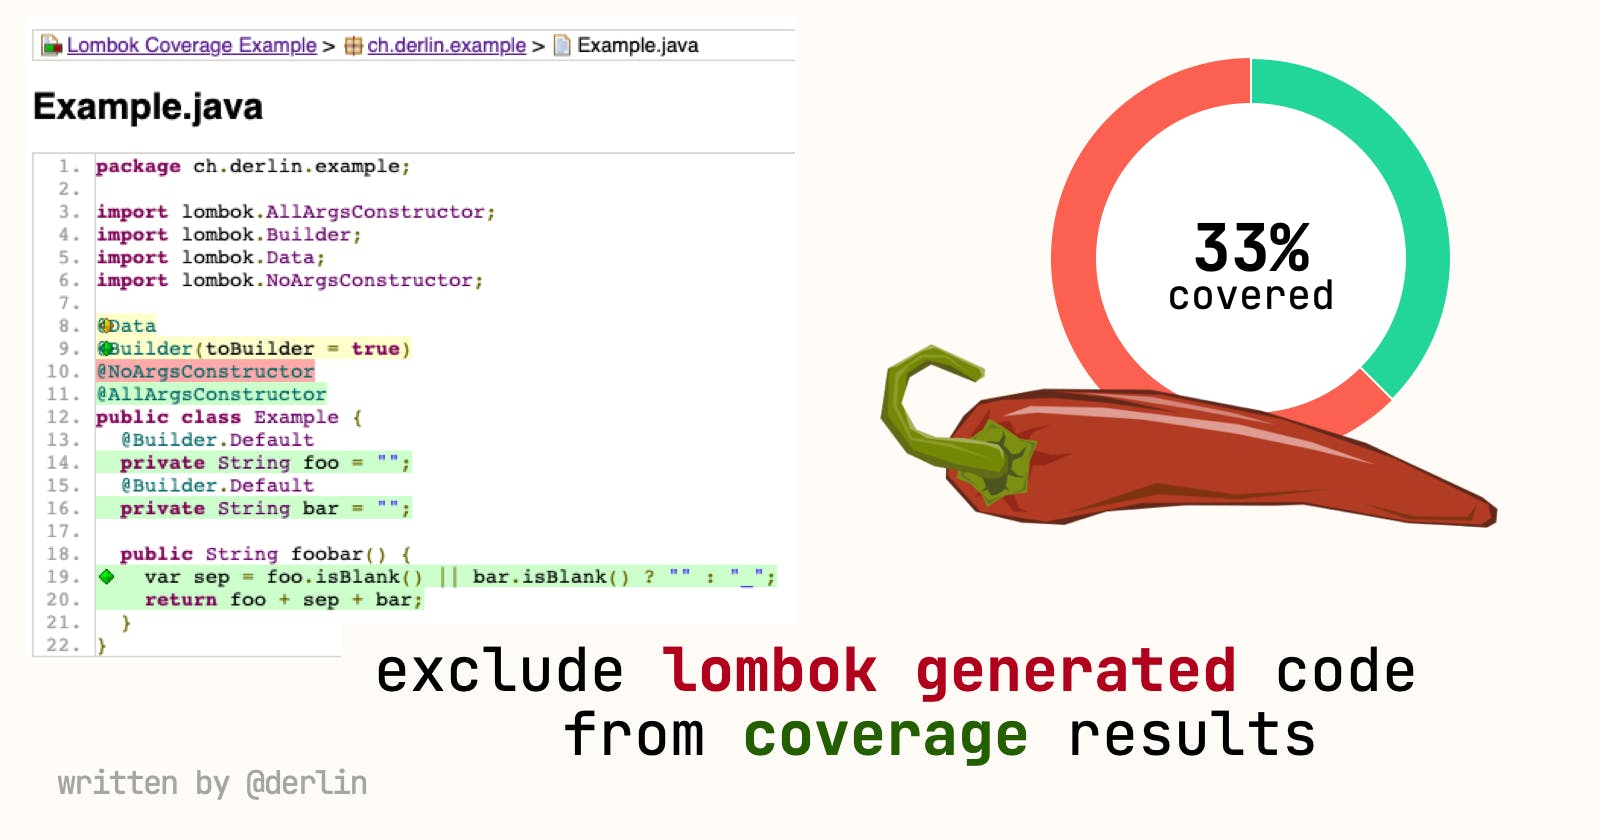 Exclude lombok generated code from test coverage (JaCoCo/SonarQube)